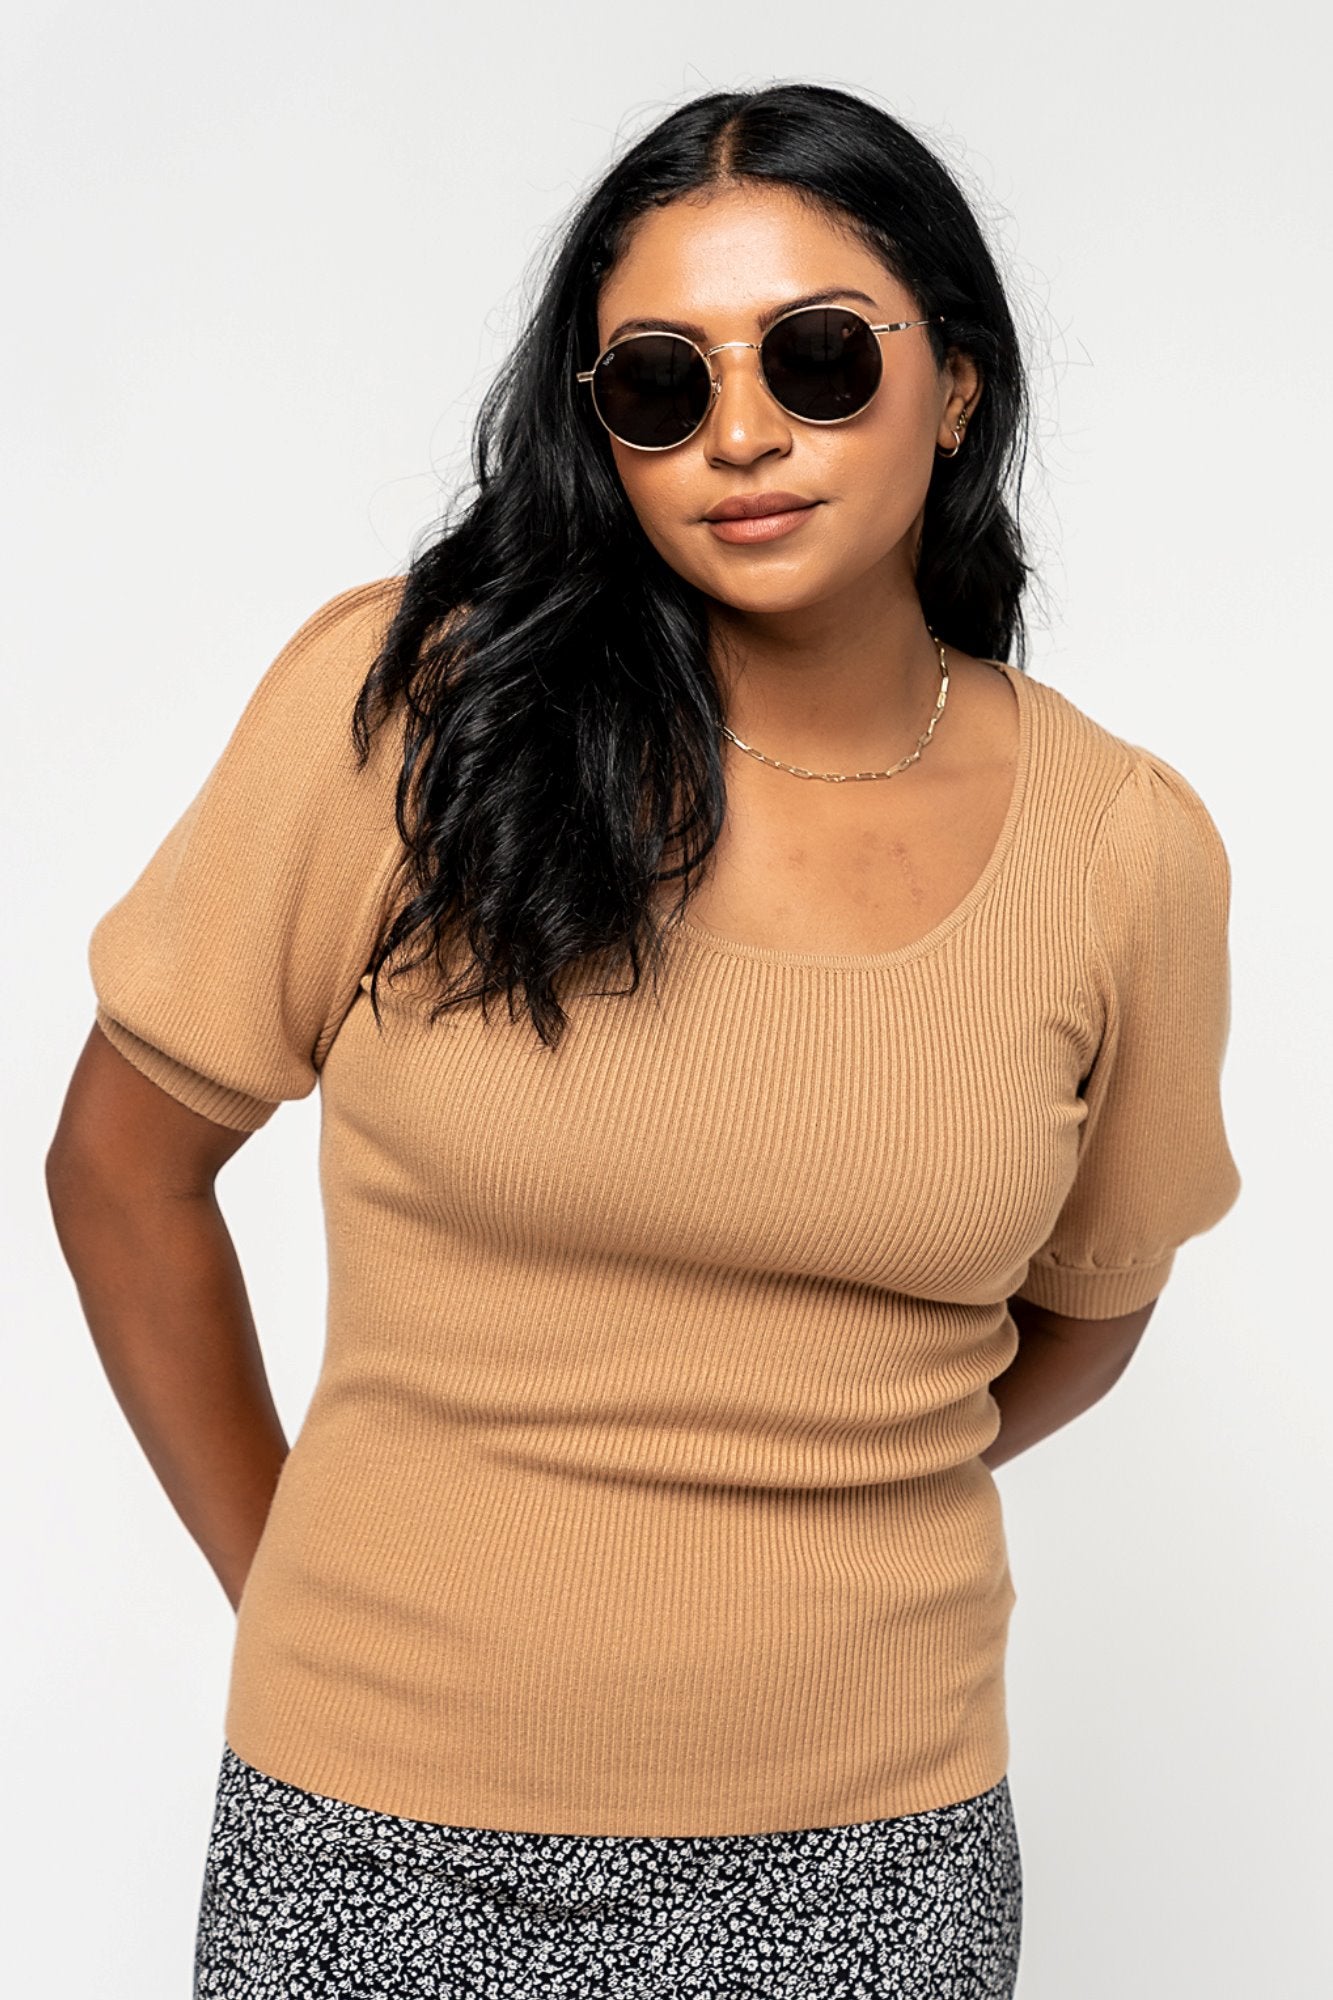 Kit Top in Camel Holley Girl 